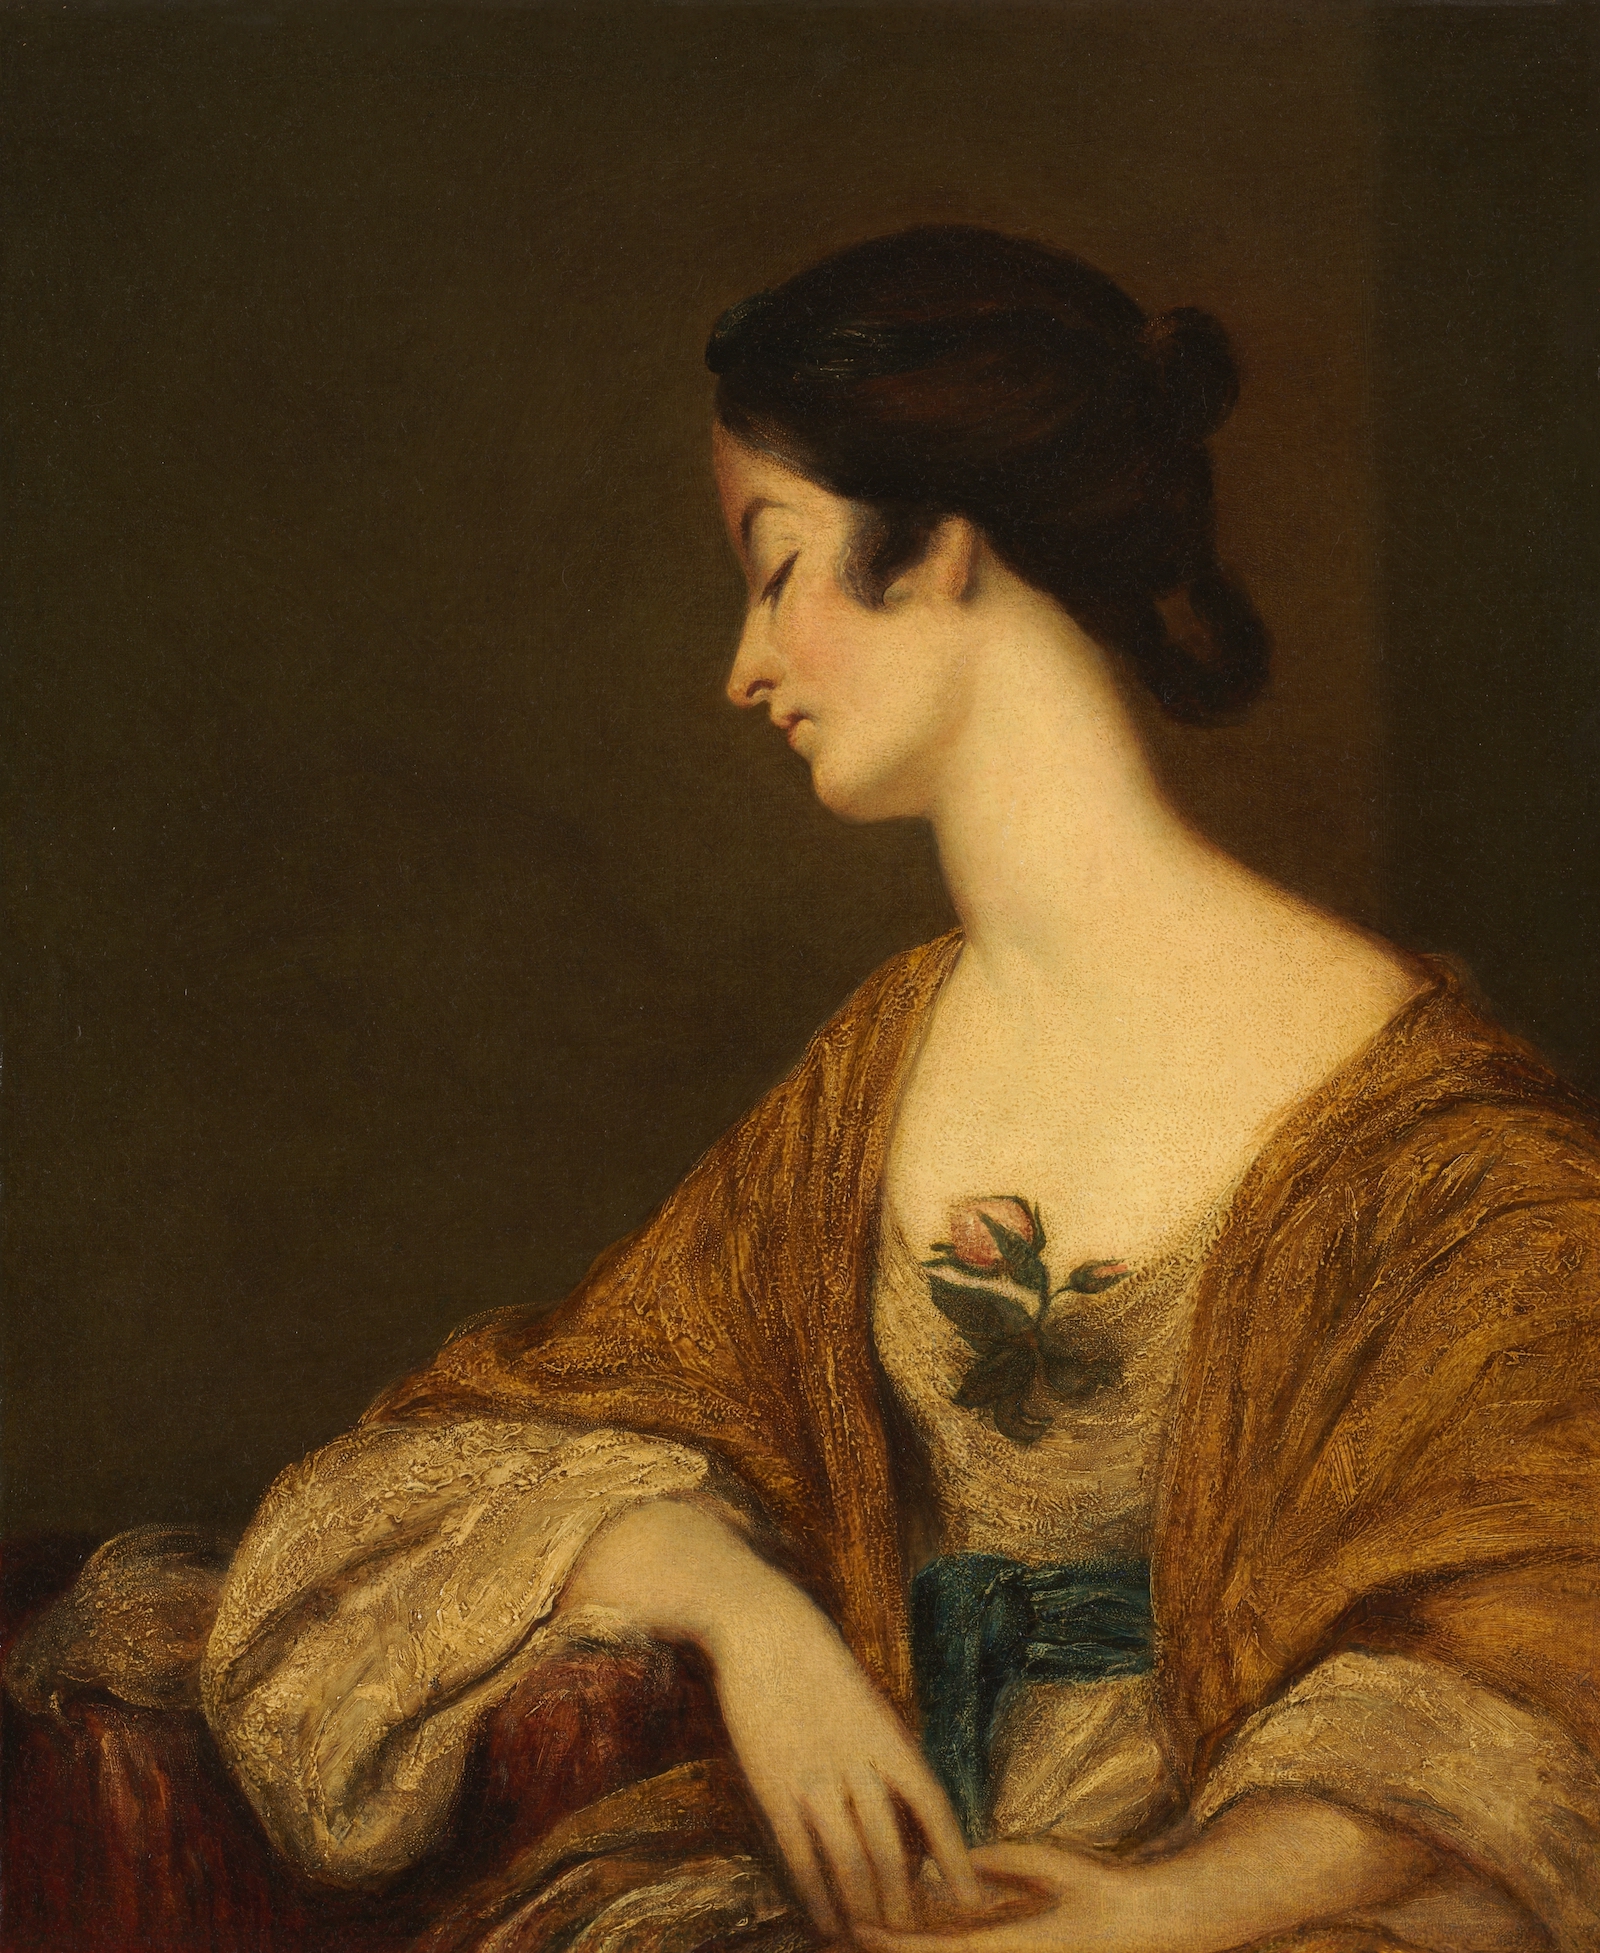 ‘Portrait of Mrs. George Collier’ echoing Lesbia and her sparrow by a follower of Joshua Reynolds, c. 18th century. Cleveland Museum of Art. Public Domain.